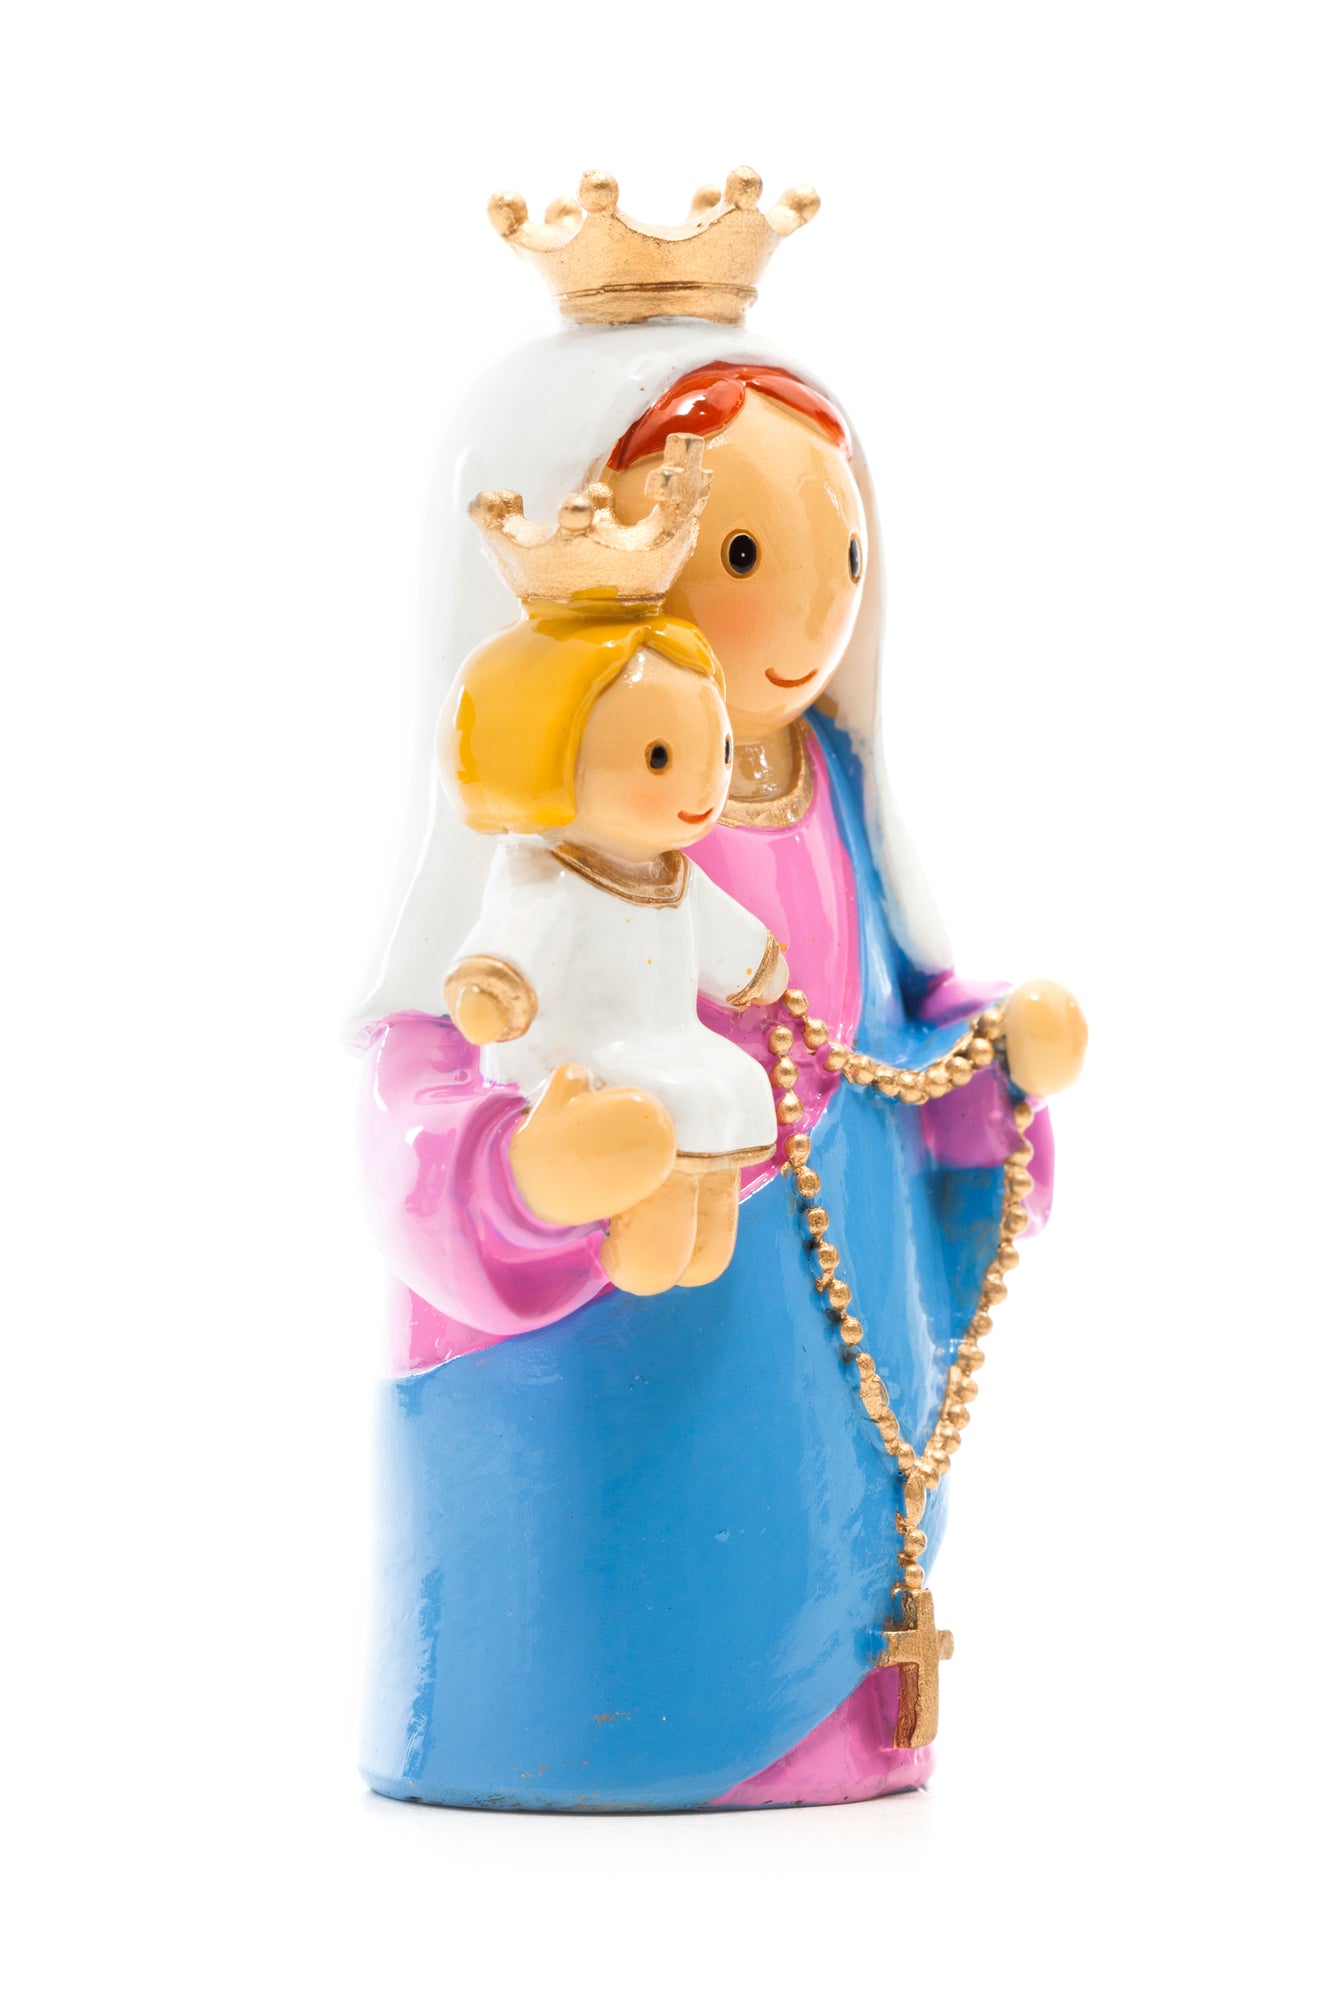 Our Lady of the Rosary statue